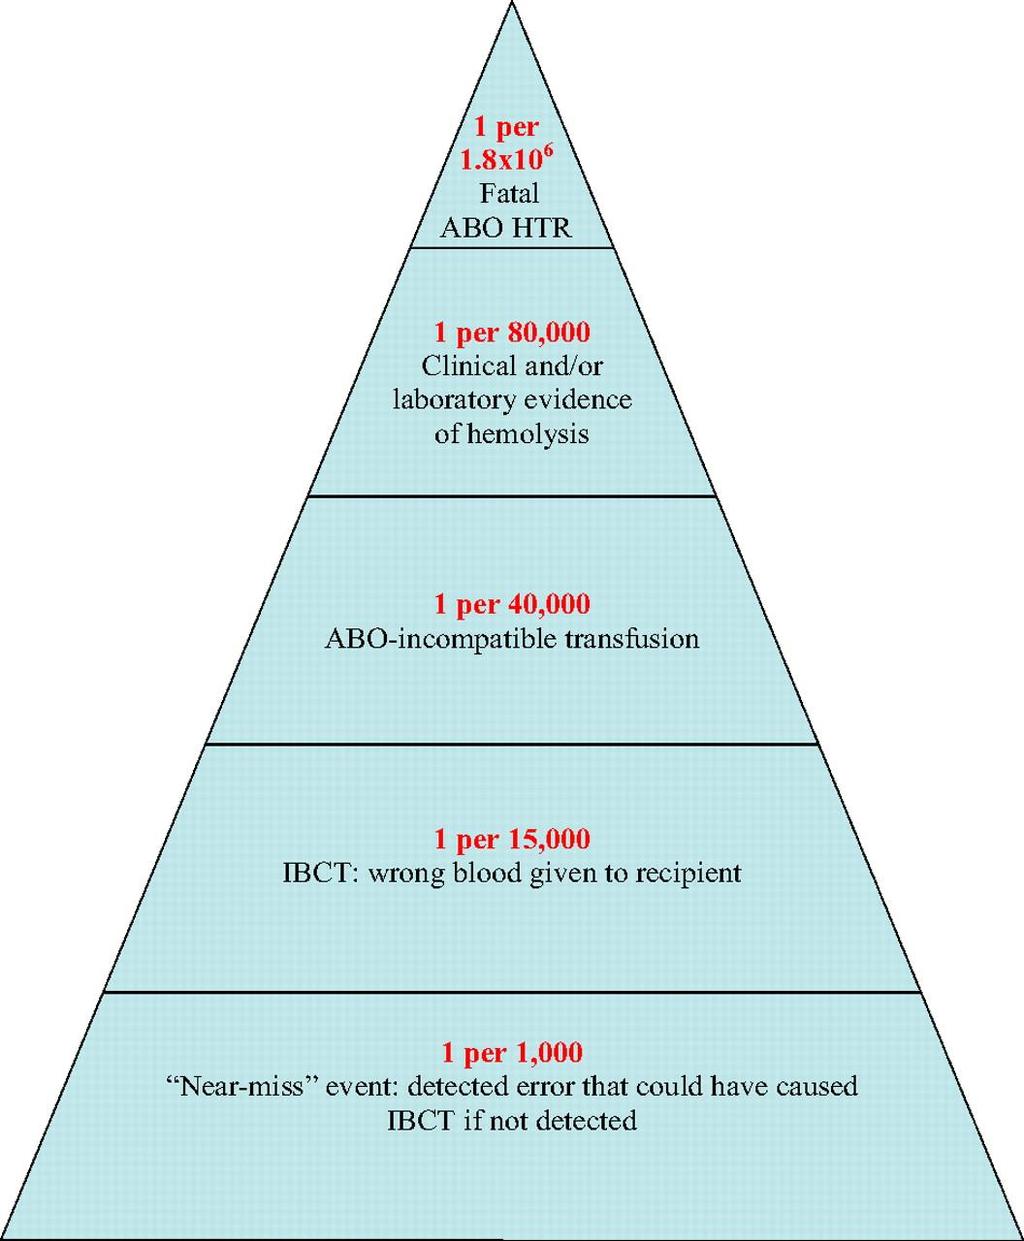 Likelihood of a serious ABO HTR, shown as a pyramid whose base represents the probability of events predisposing to incorrect blood component transfusion, whose successive layers show the likelihood